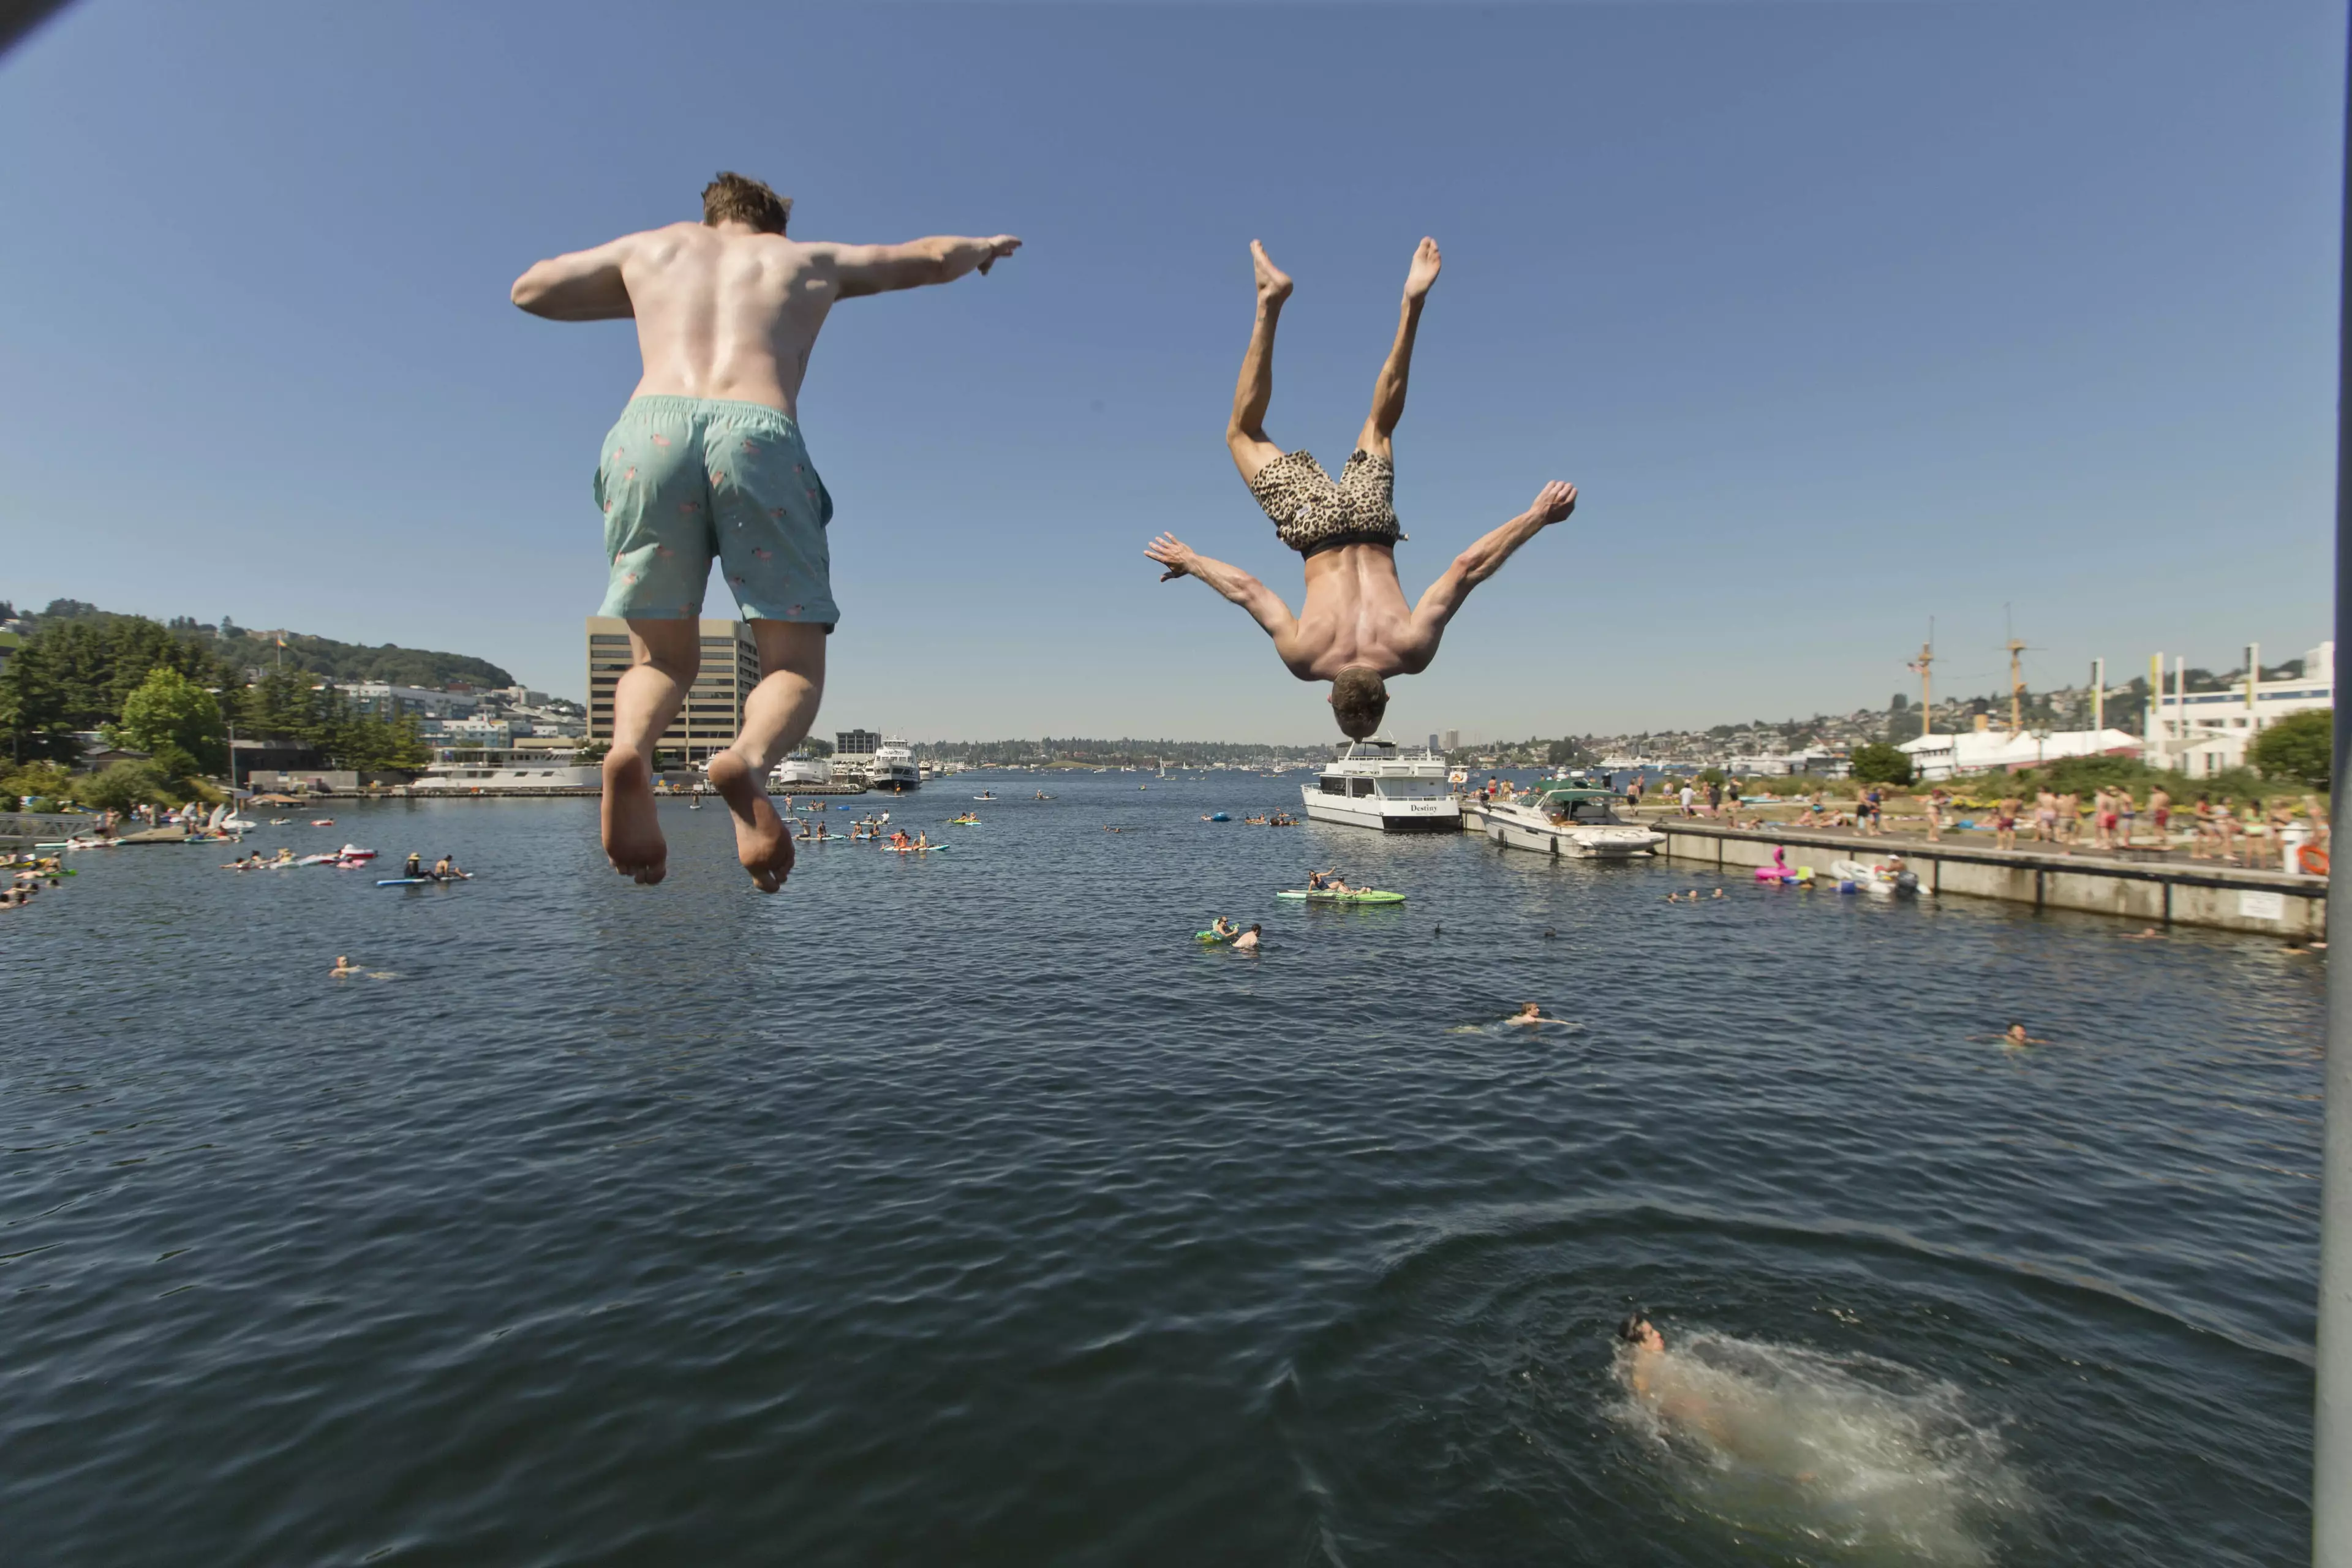 Two people jump from a pedestrian bridge at Lake Union Park, Seattle.